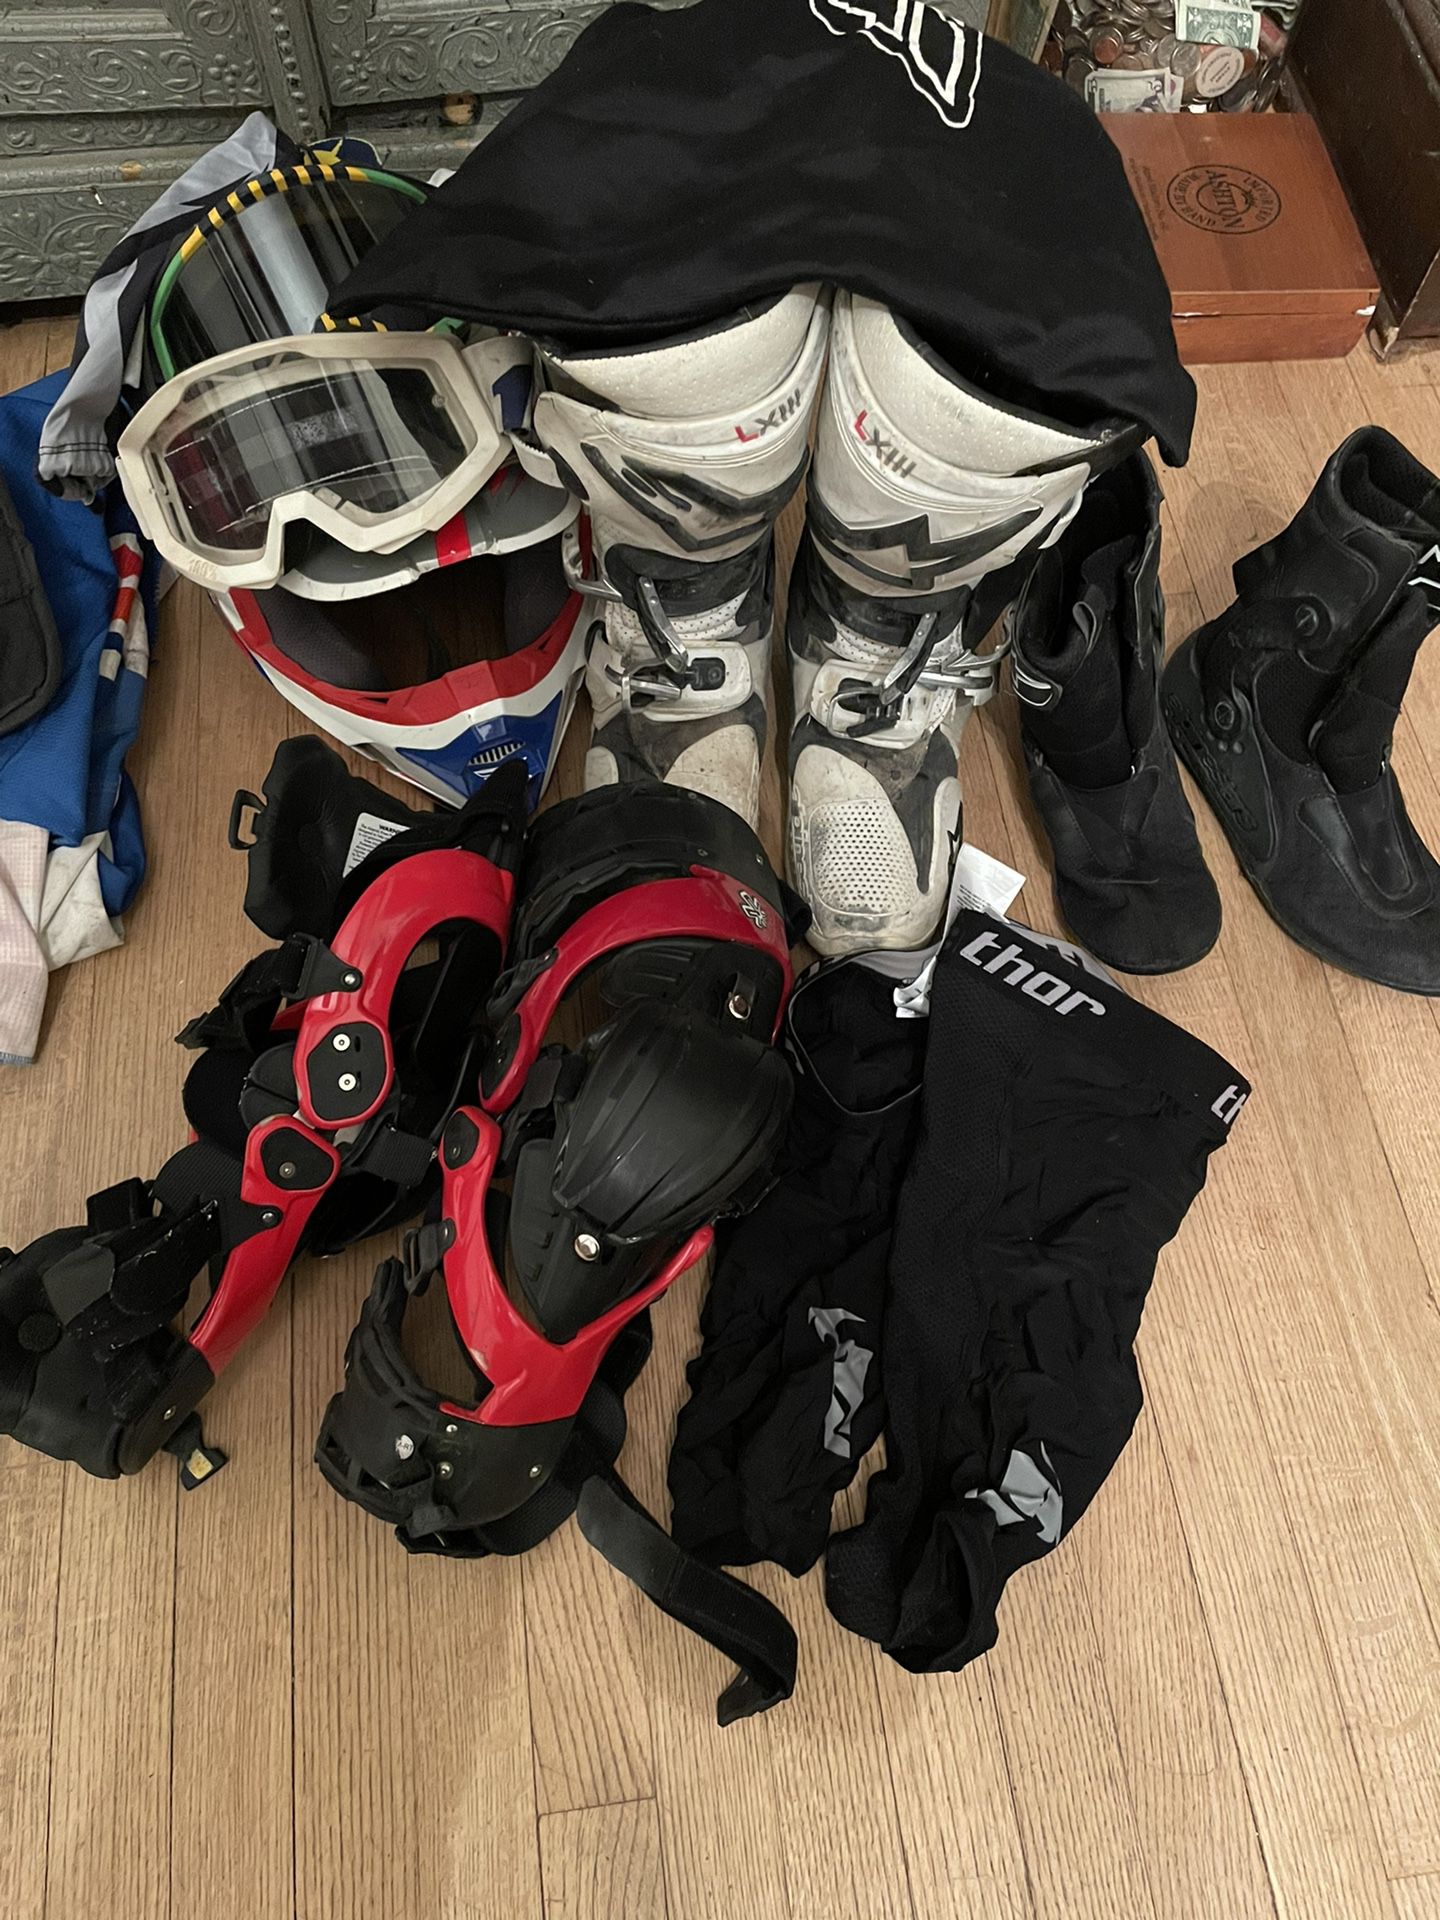 Motocross Gear And Clothes